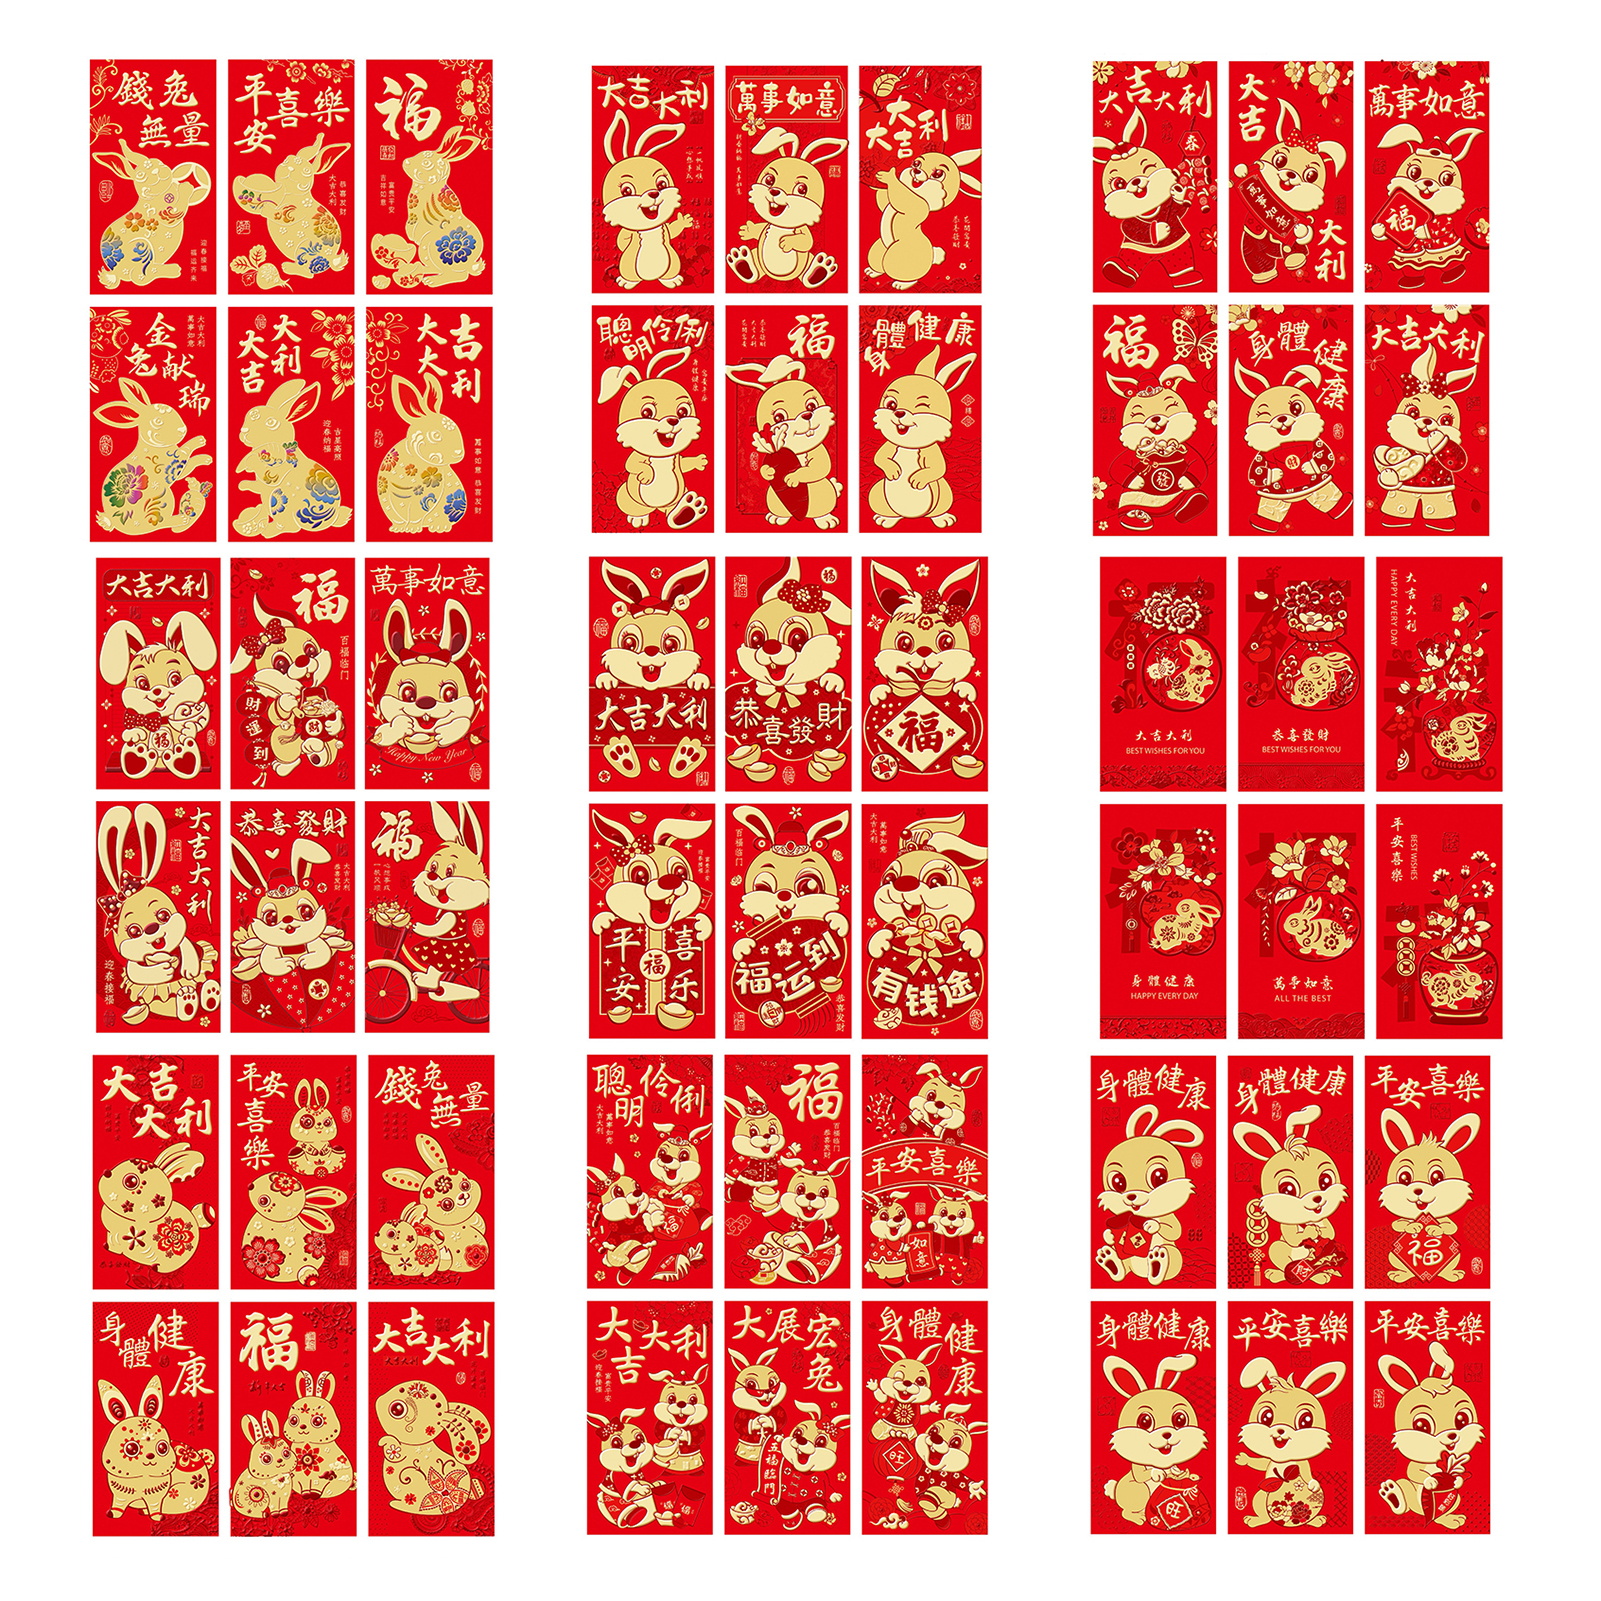 Mightlink 6pcs Red Envelope Year of The Rabbit Cartoon Pattern Best Wish 2023 New Year Bunny Print Red Envelopes for Festival